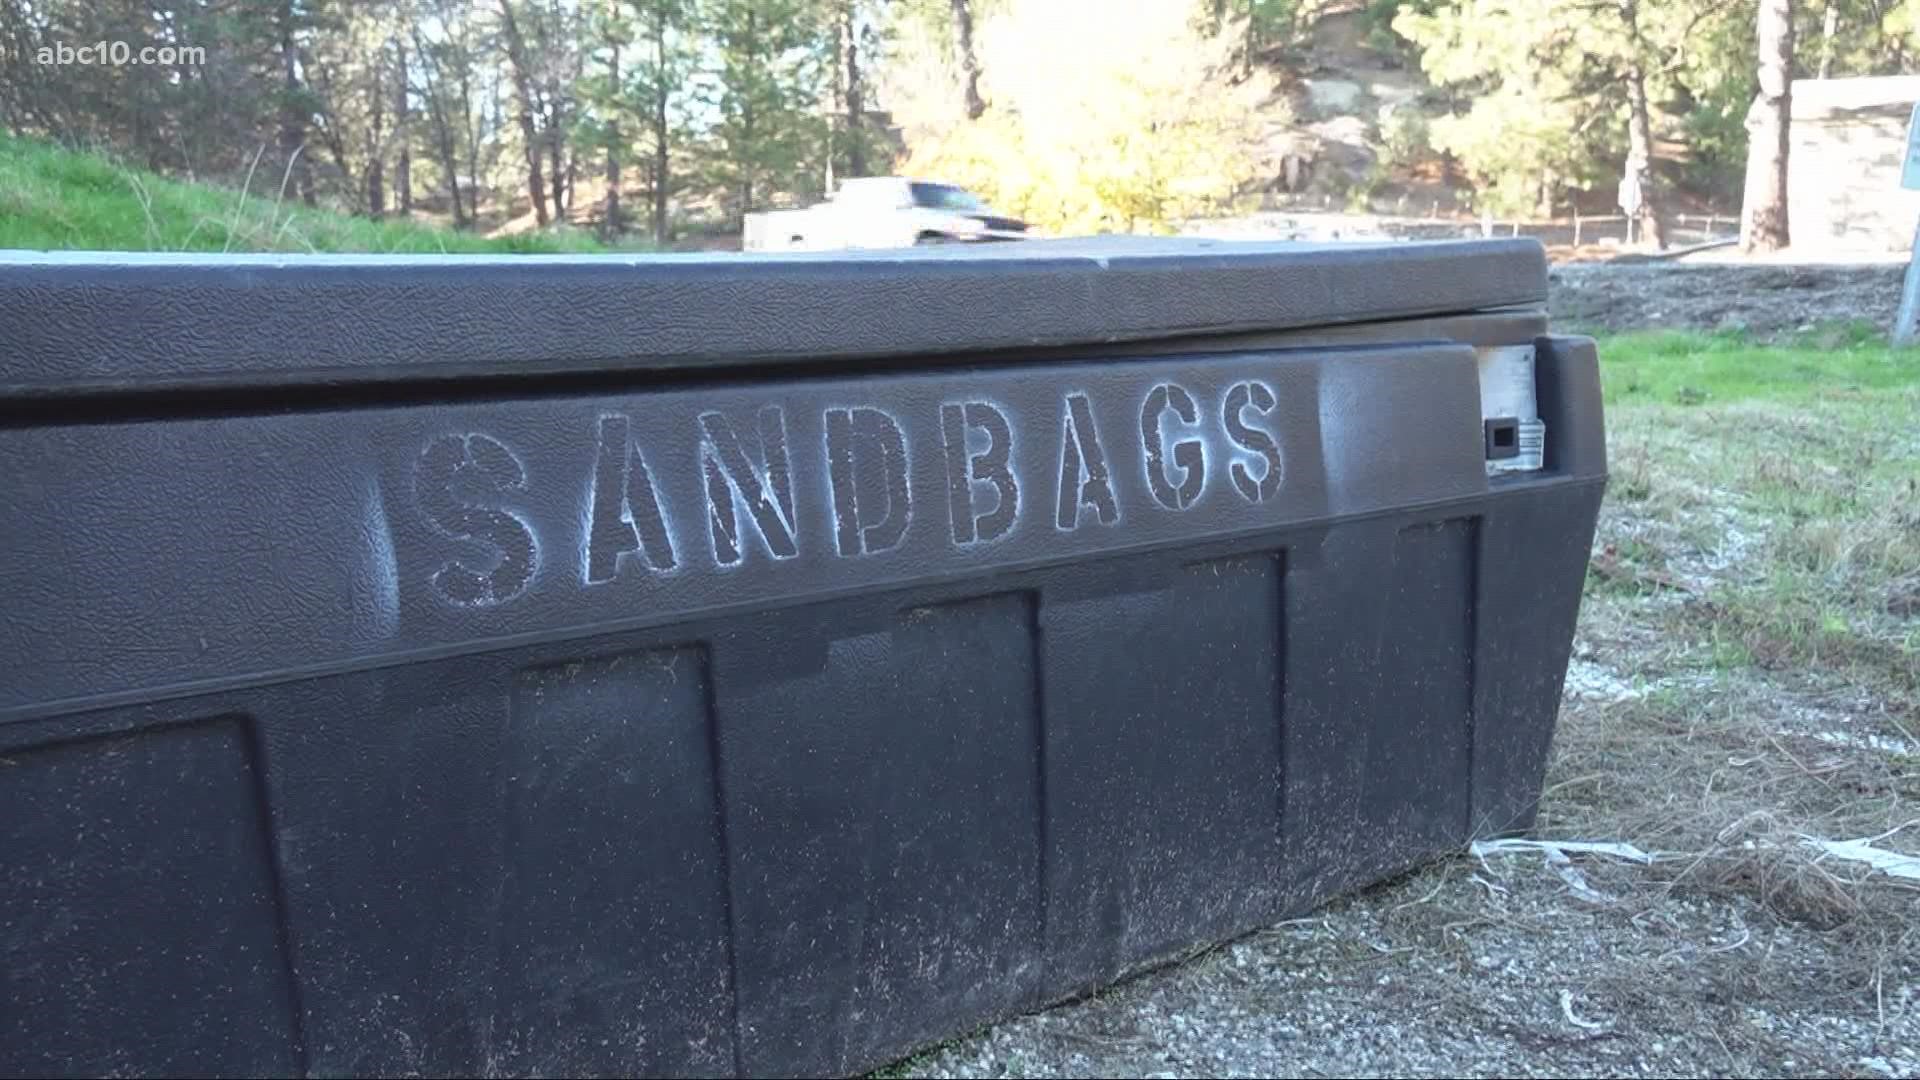 With heavy rain expected to hit Northern California in the next few days, residents are stocking up on sandbags in case of a flood.